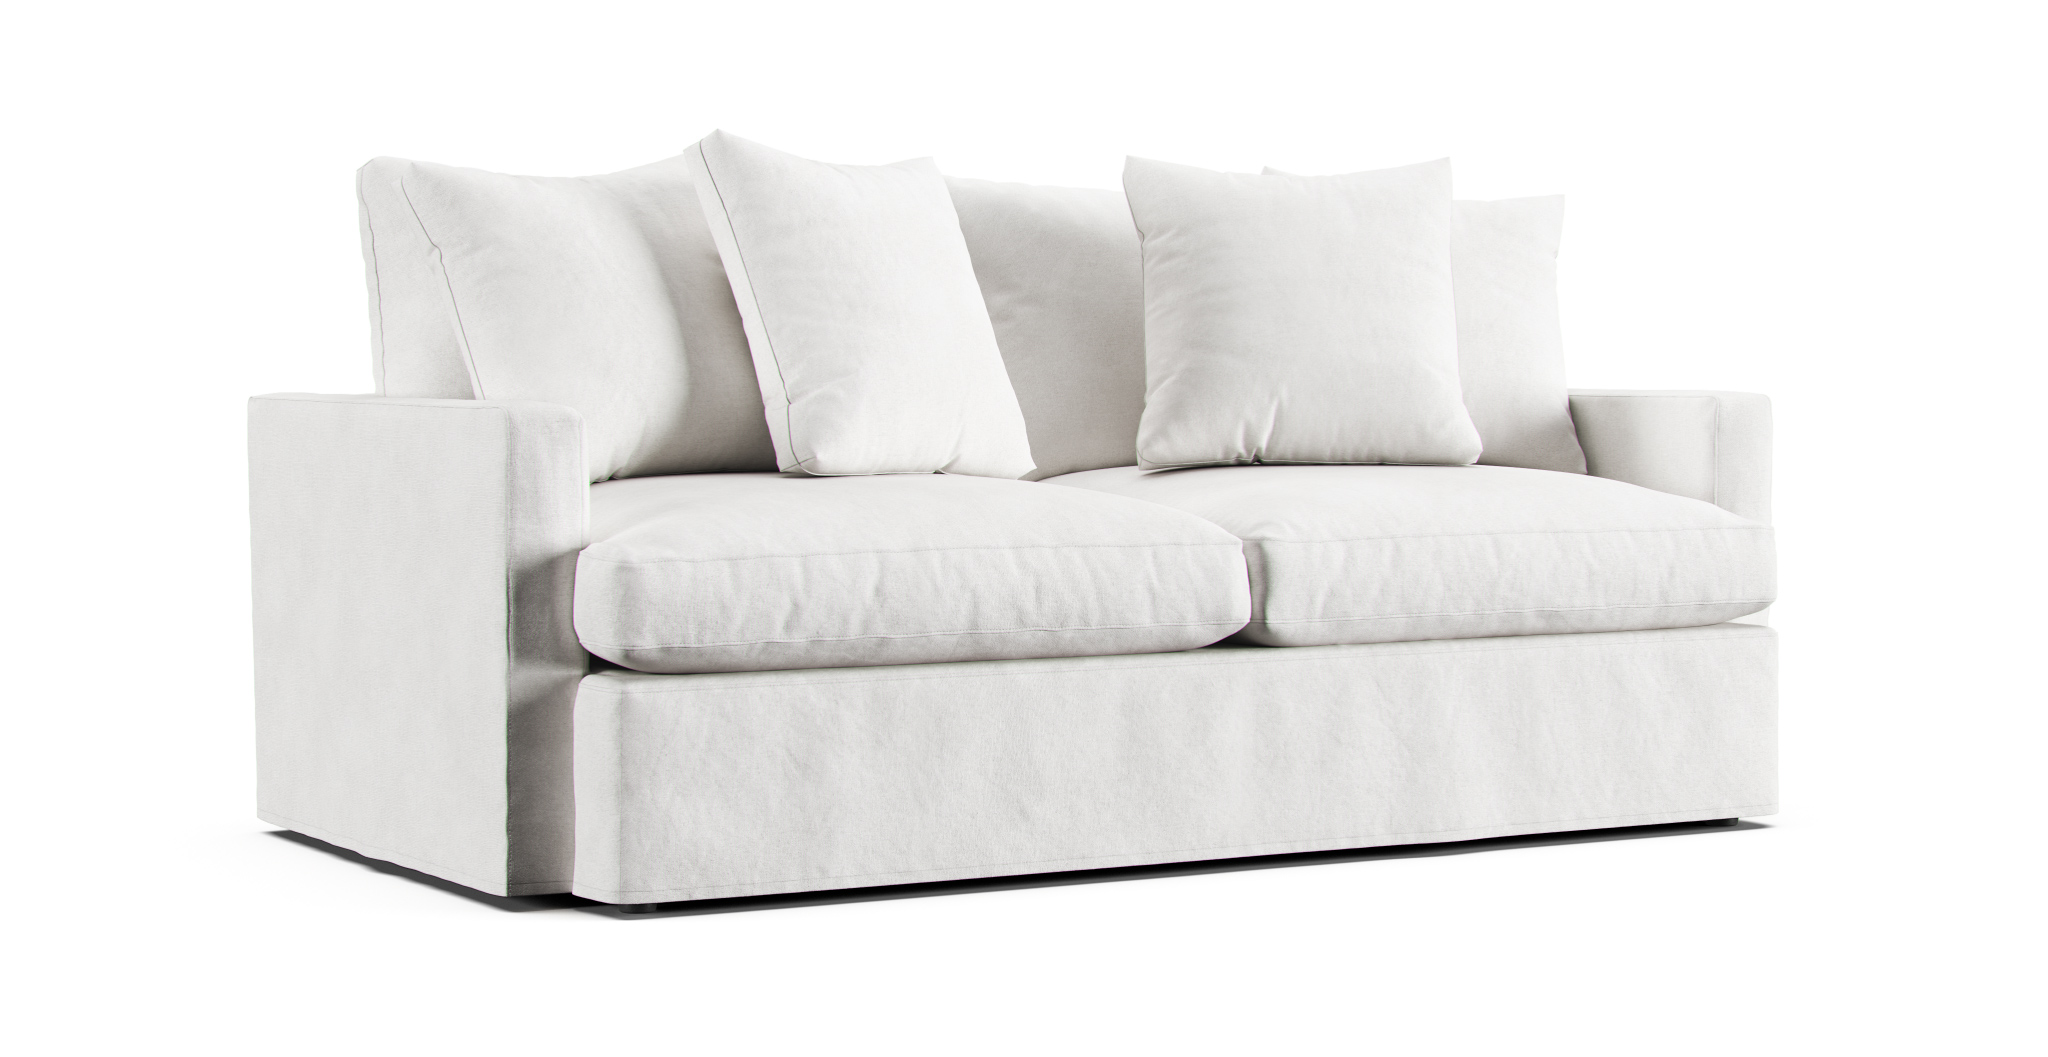 Replacement Crate and Barrel Sofa Sectional Armchair Slipcovers 